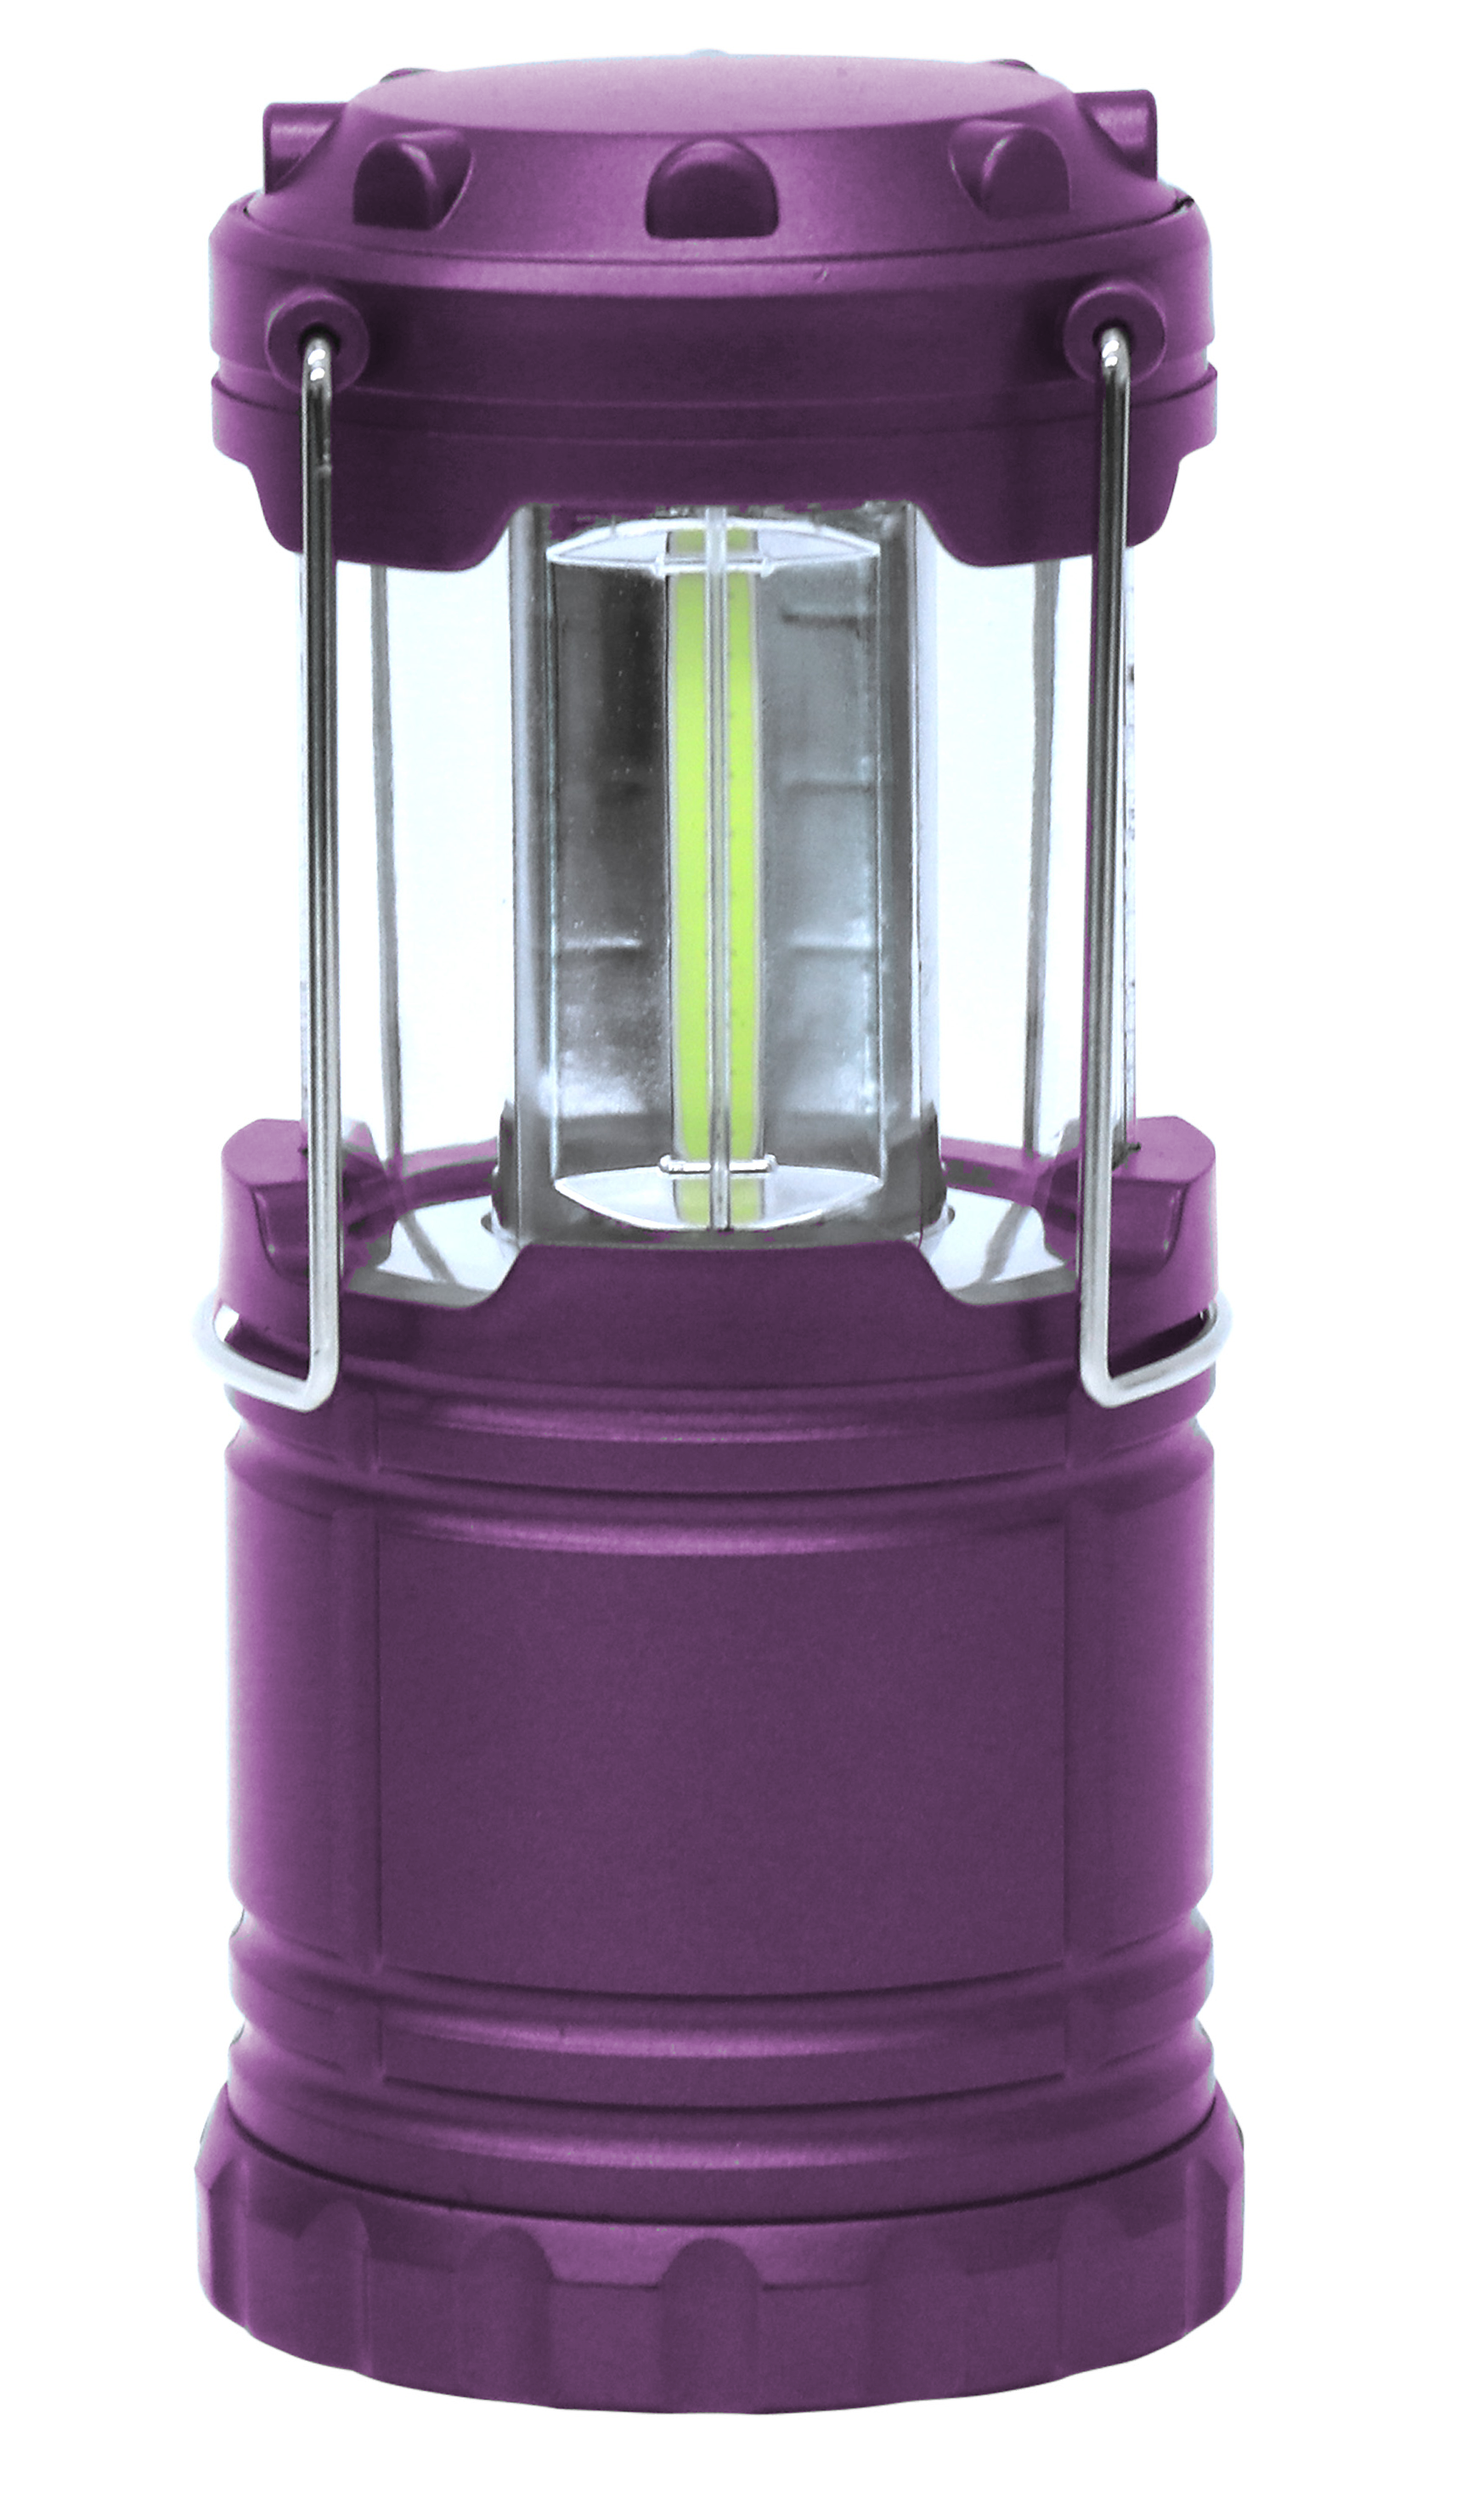 Bell + Howell TacLight Lantern Battery Powered Portable LED Collapsible Camping & Outdoor Torch